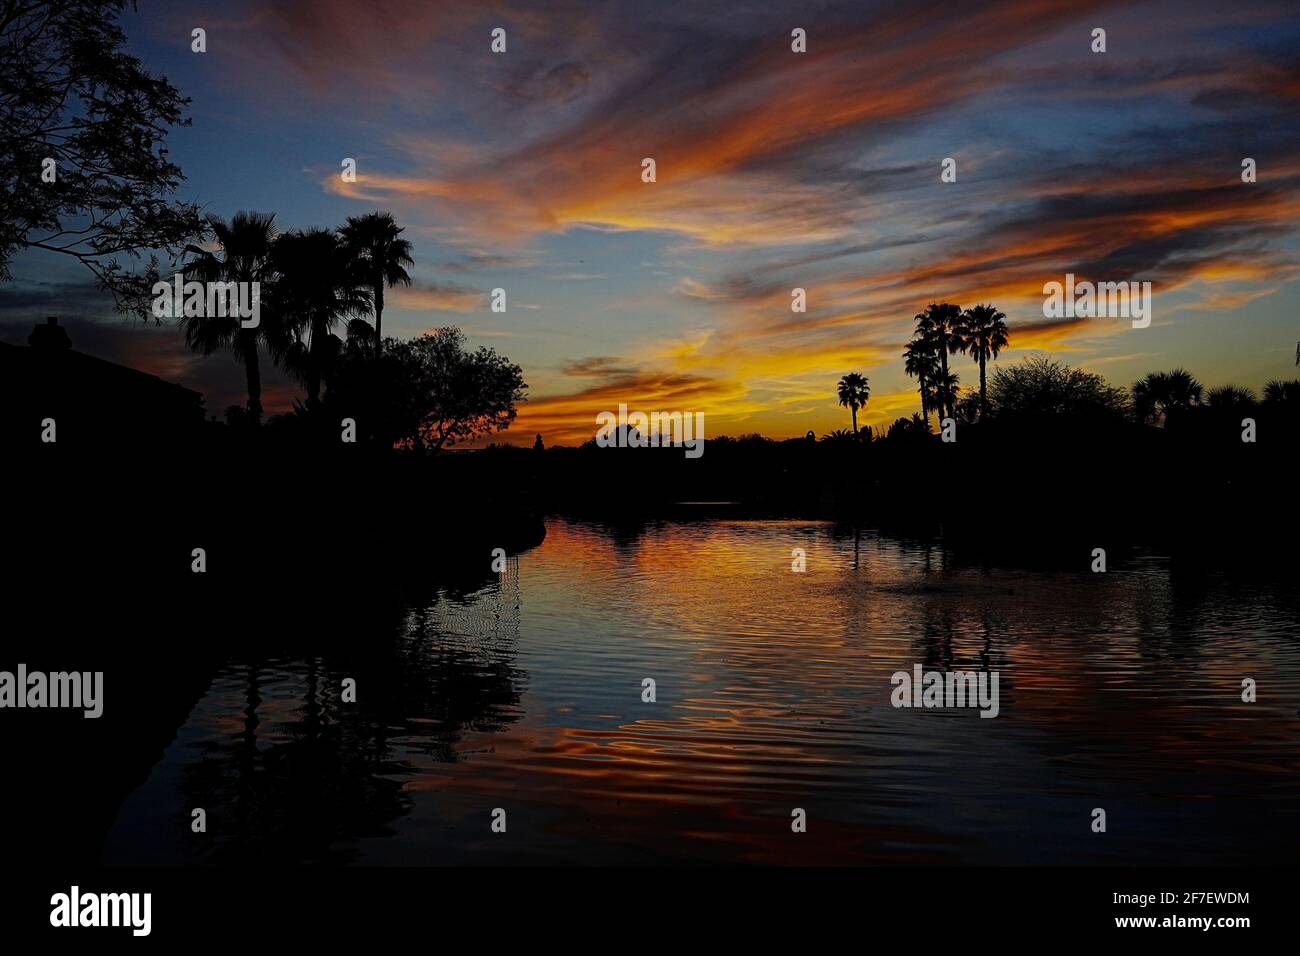 A silhouette of palm trees reflecting on water at sunset. Stock Photo